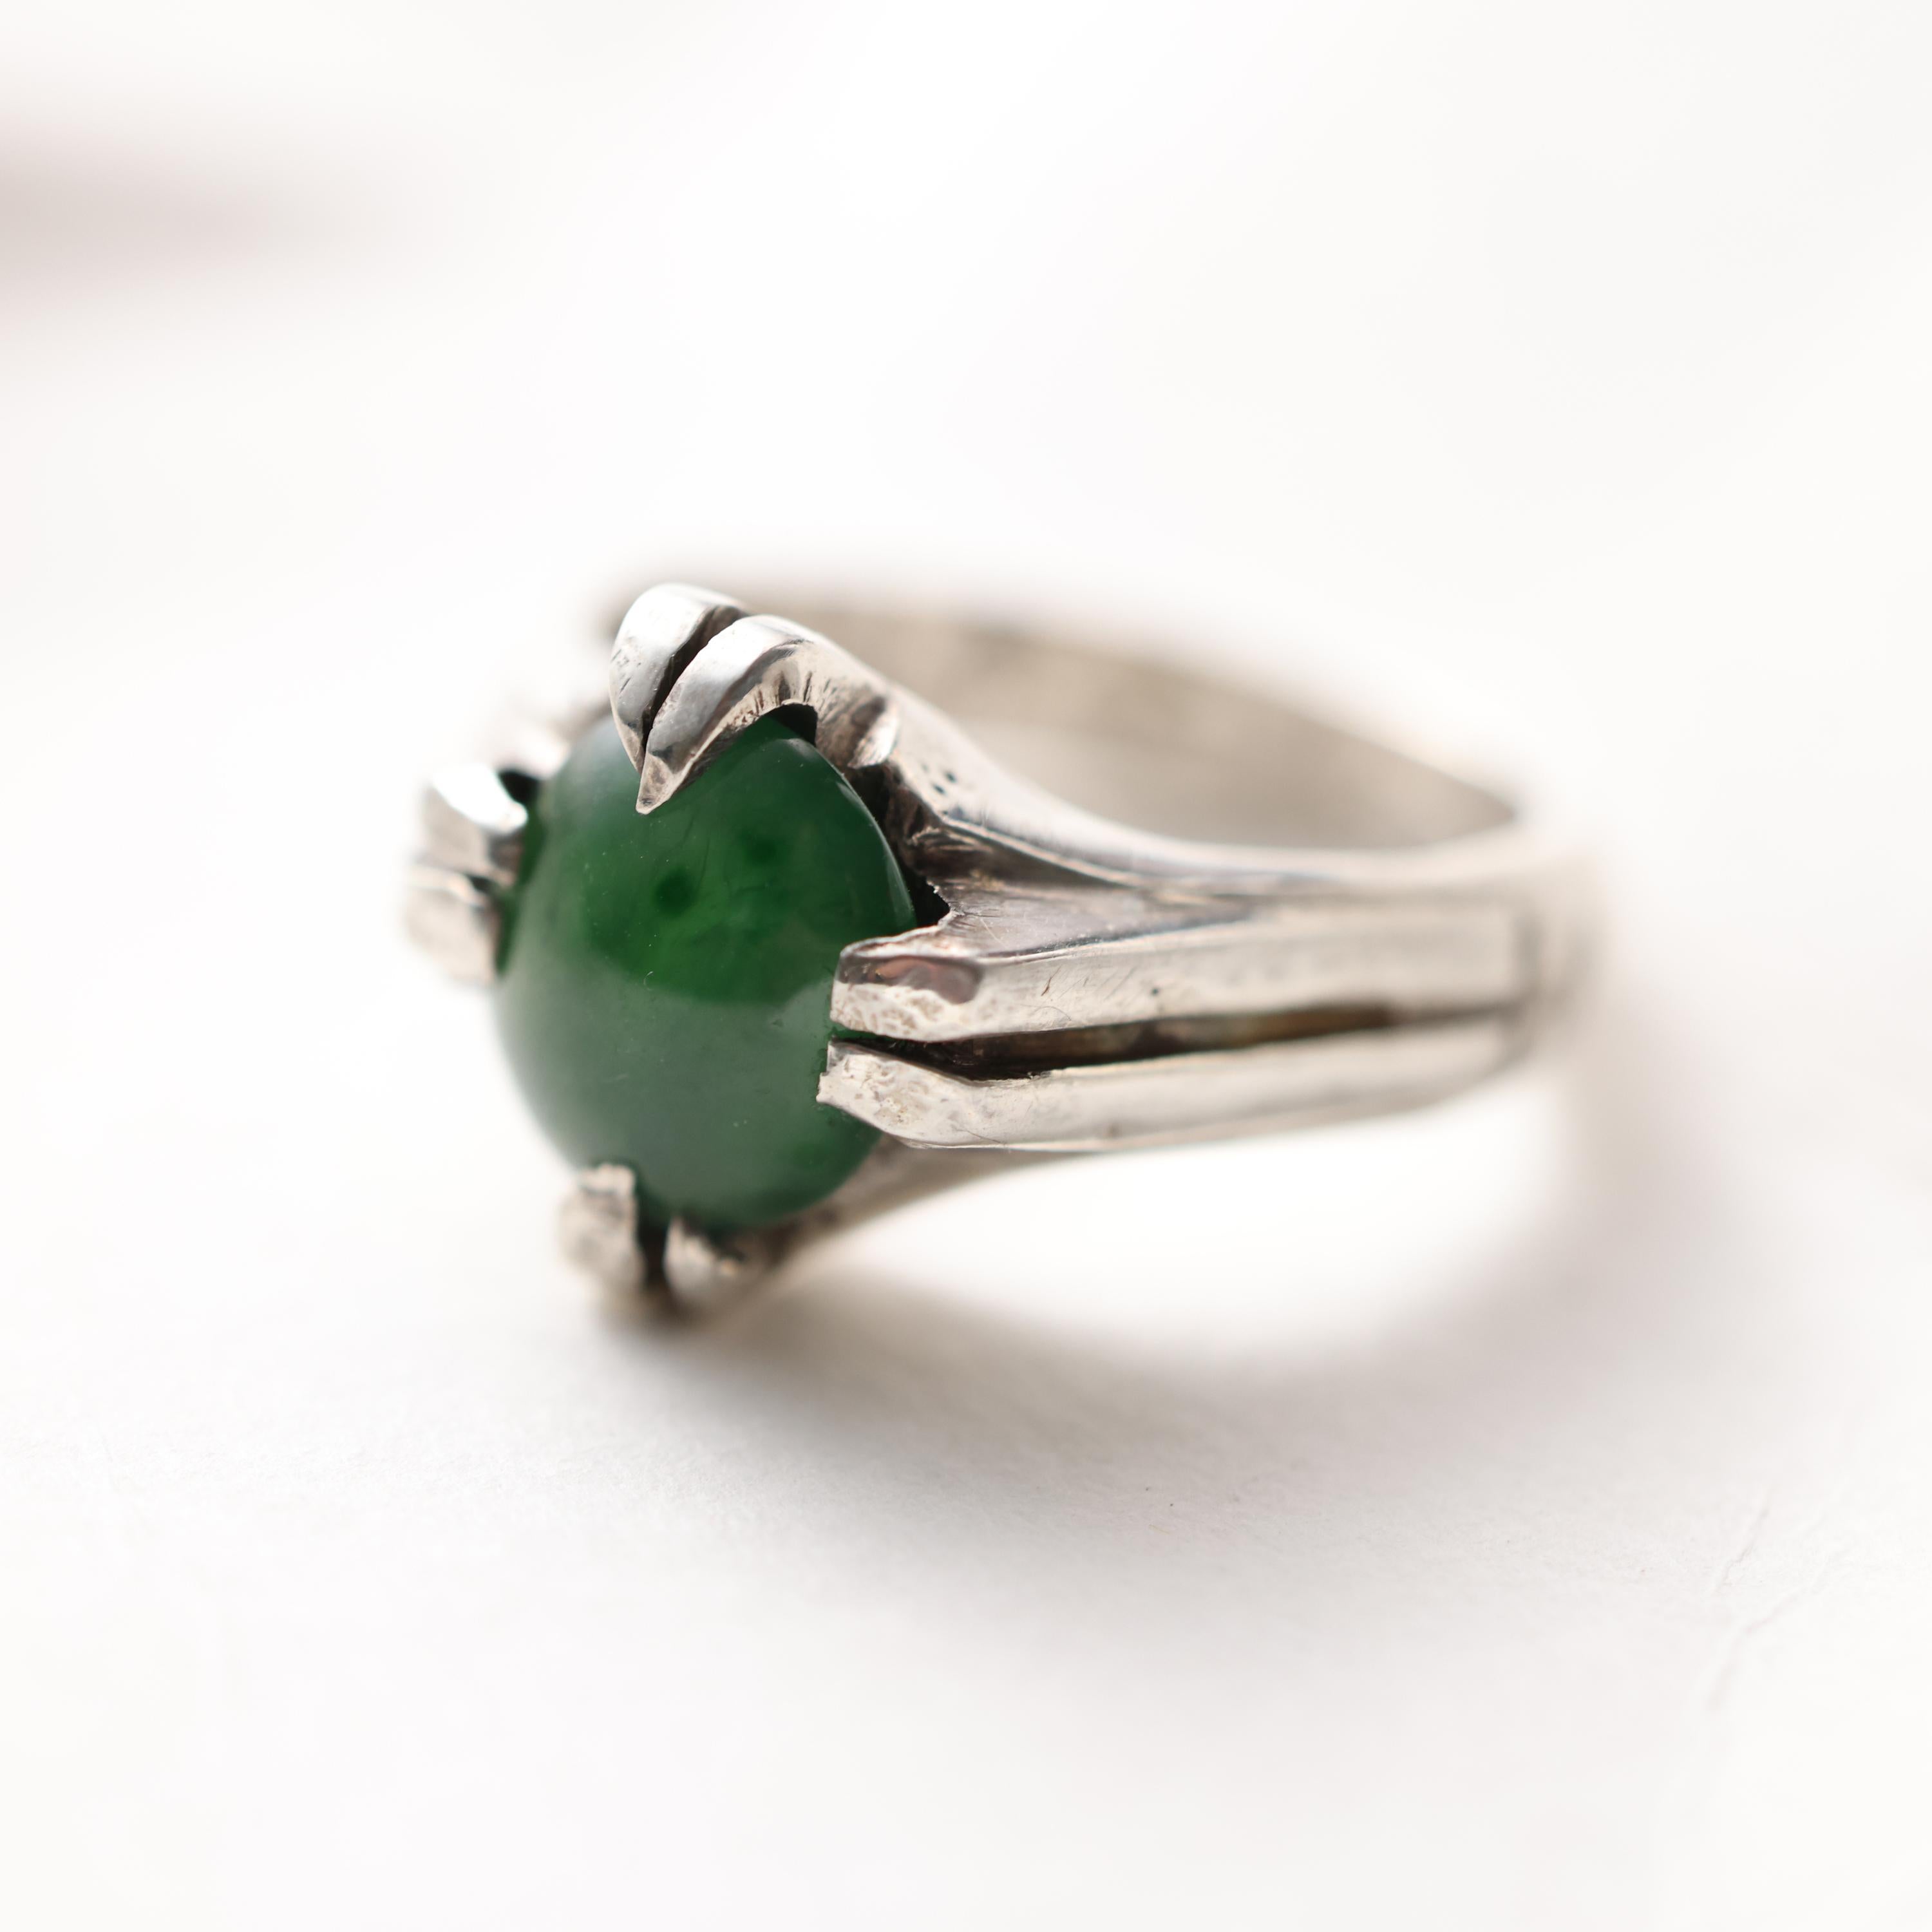 Omphacite Jade Ring in Silver, Certified Untreated Fei Cui 3